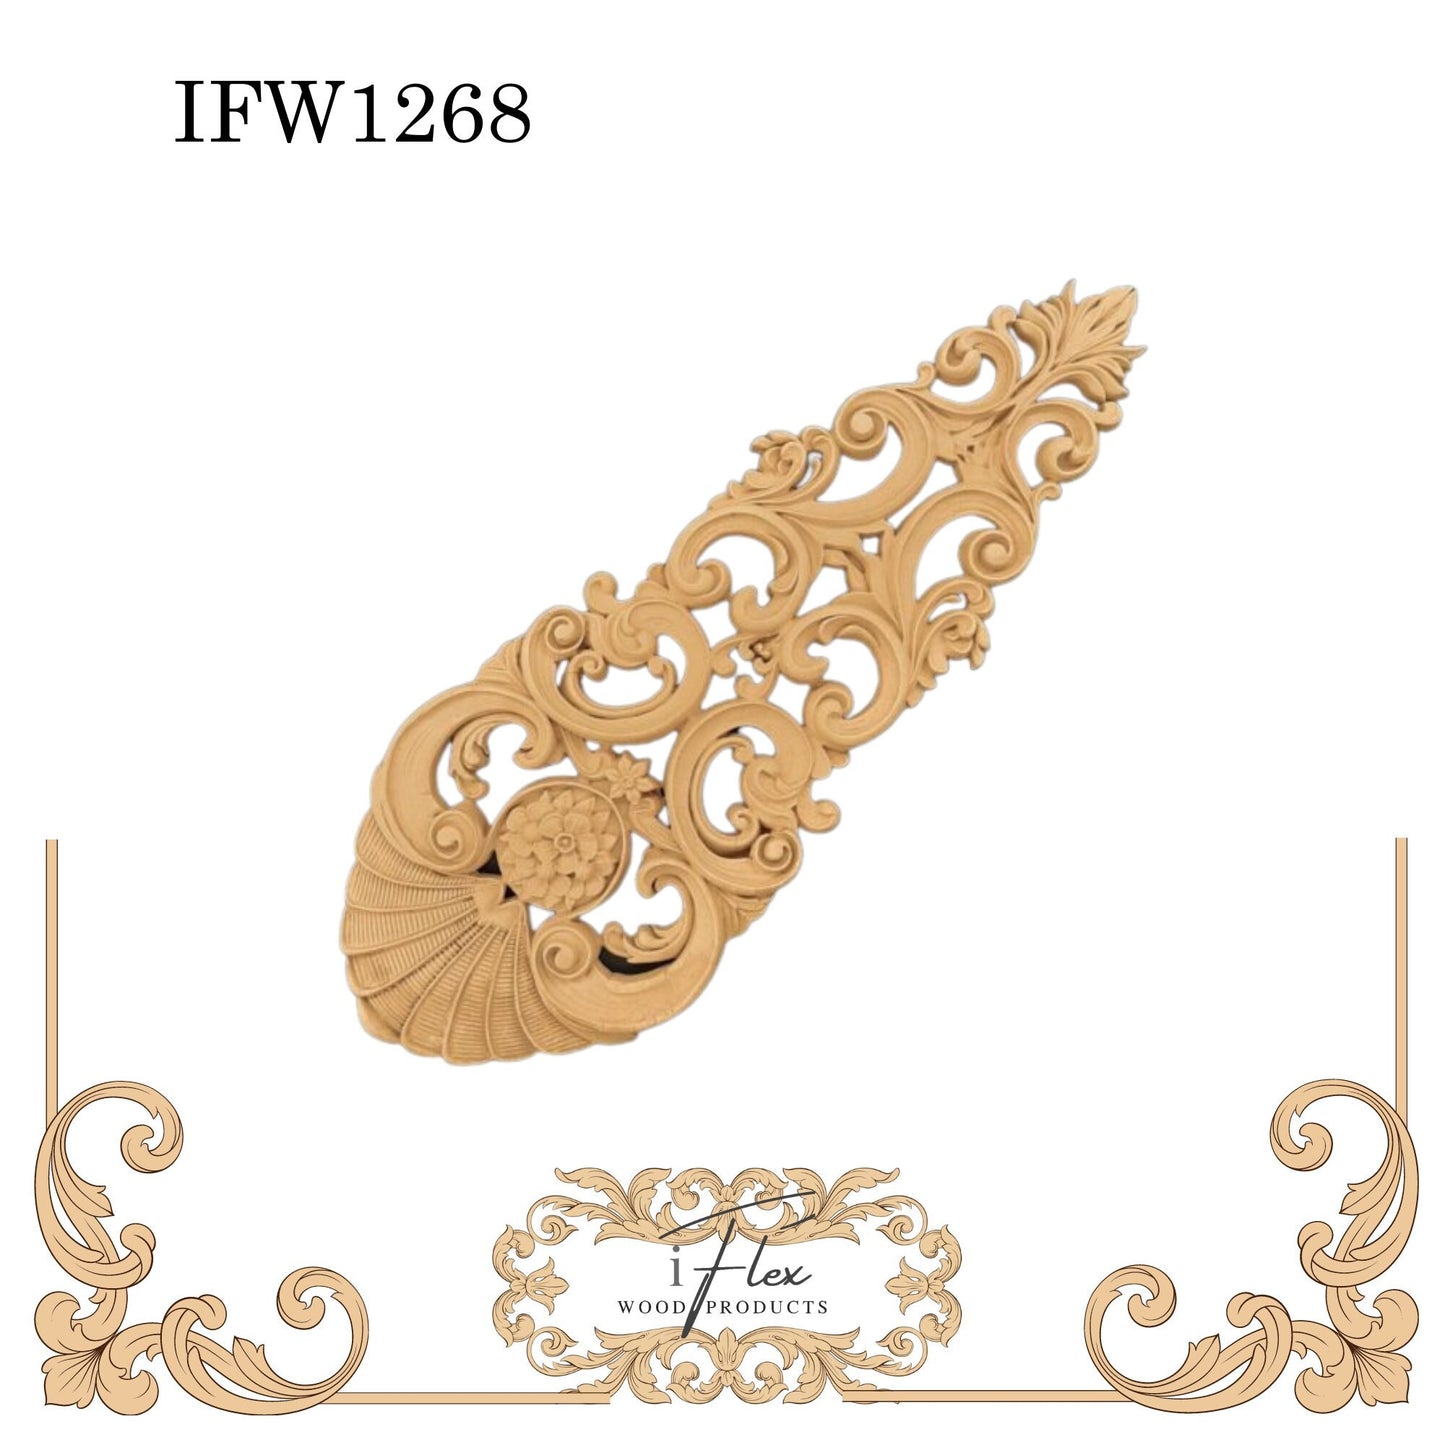 IFW 1268 iFlex Wood Products, bendable mouldings, flexible, wooden appliques, drop, architectural piece